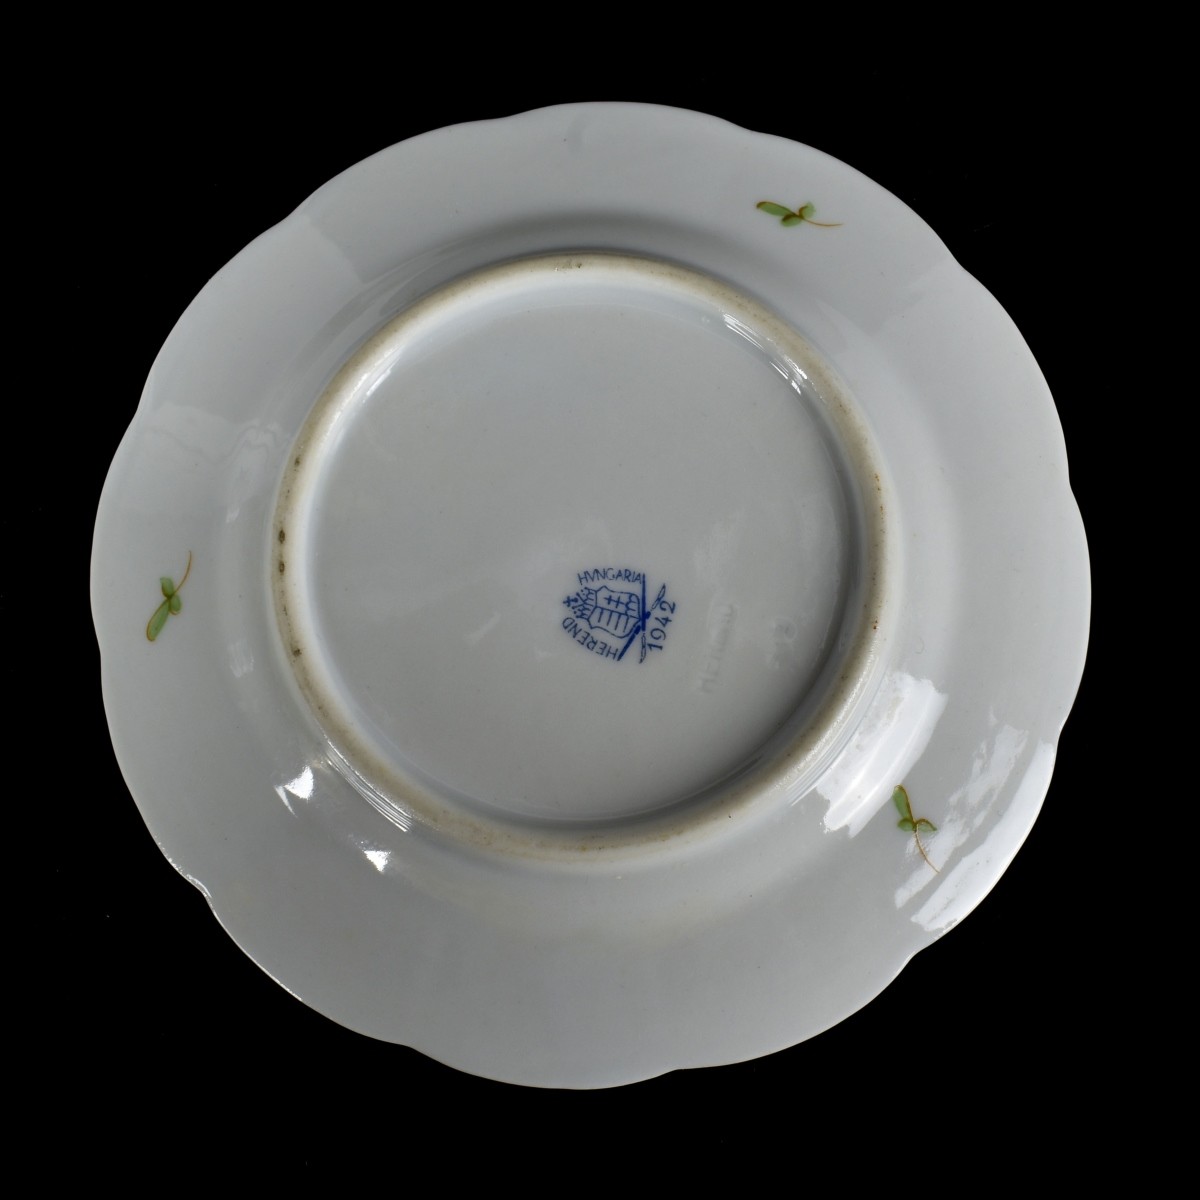 Collection Herend Porcelain Tableware